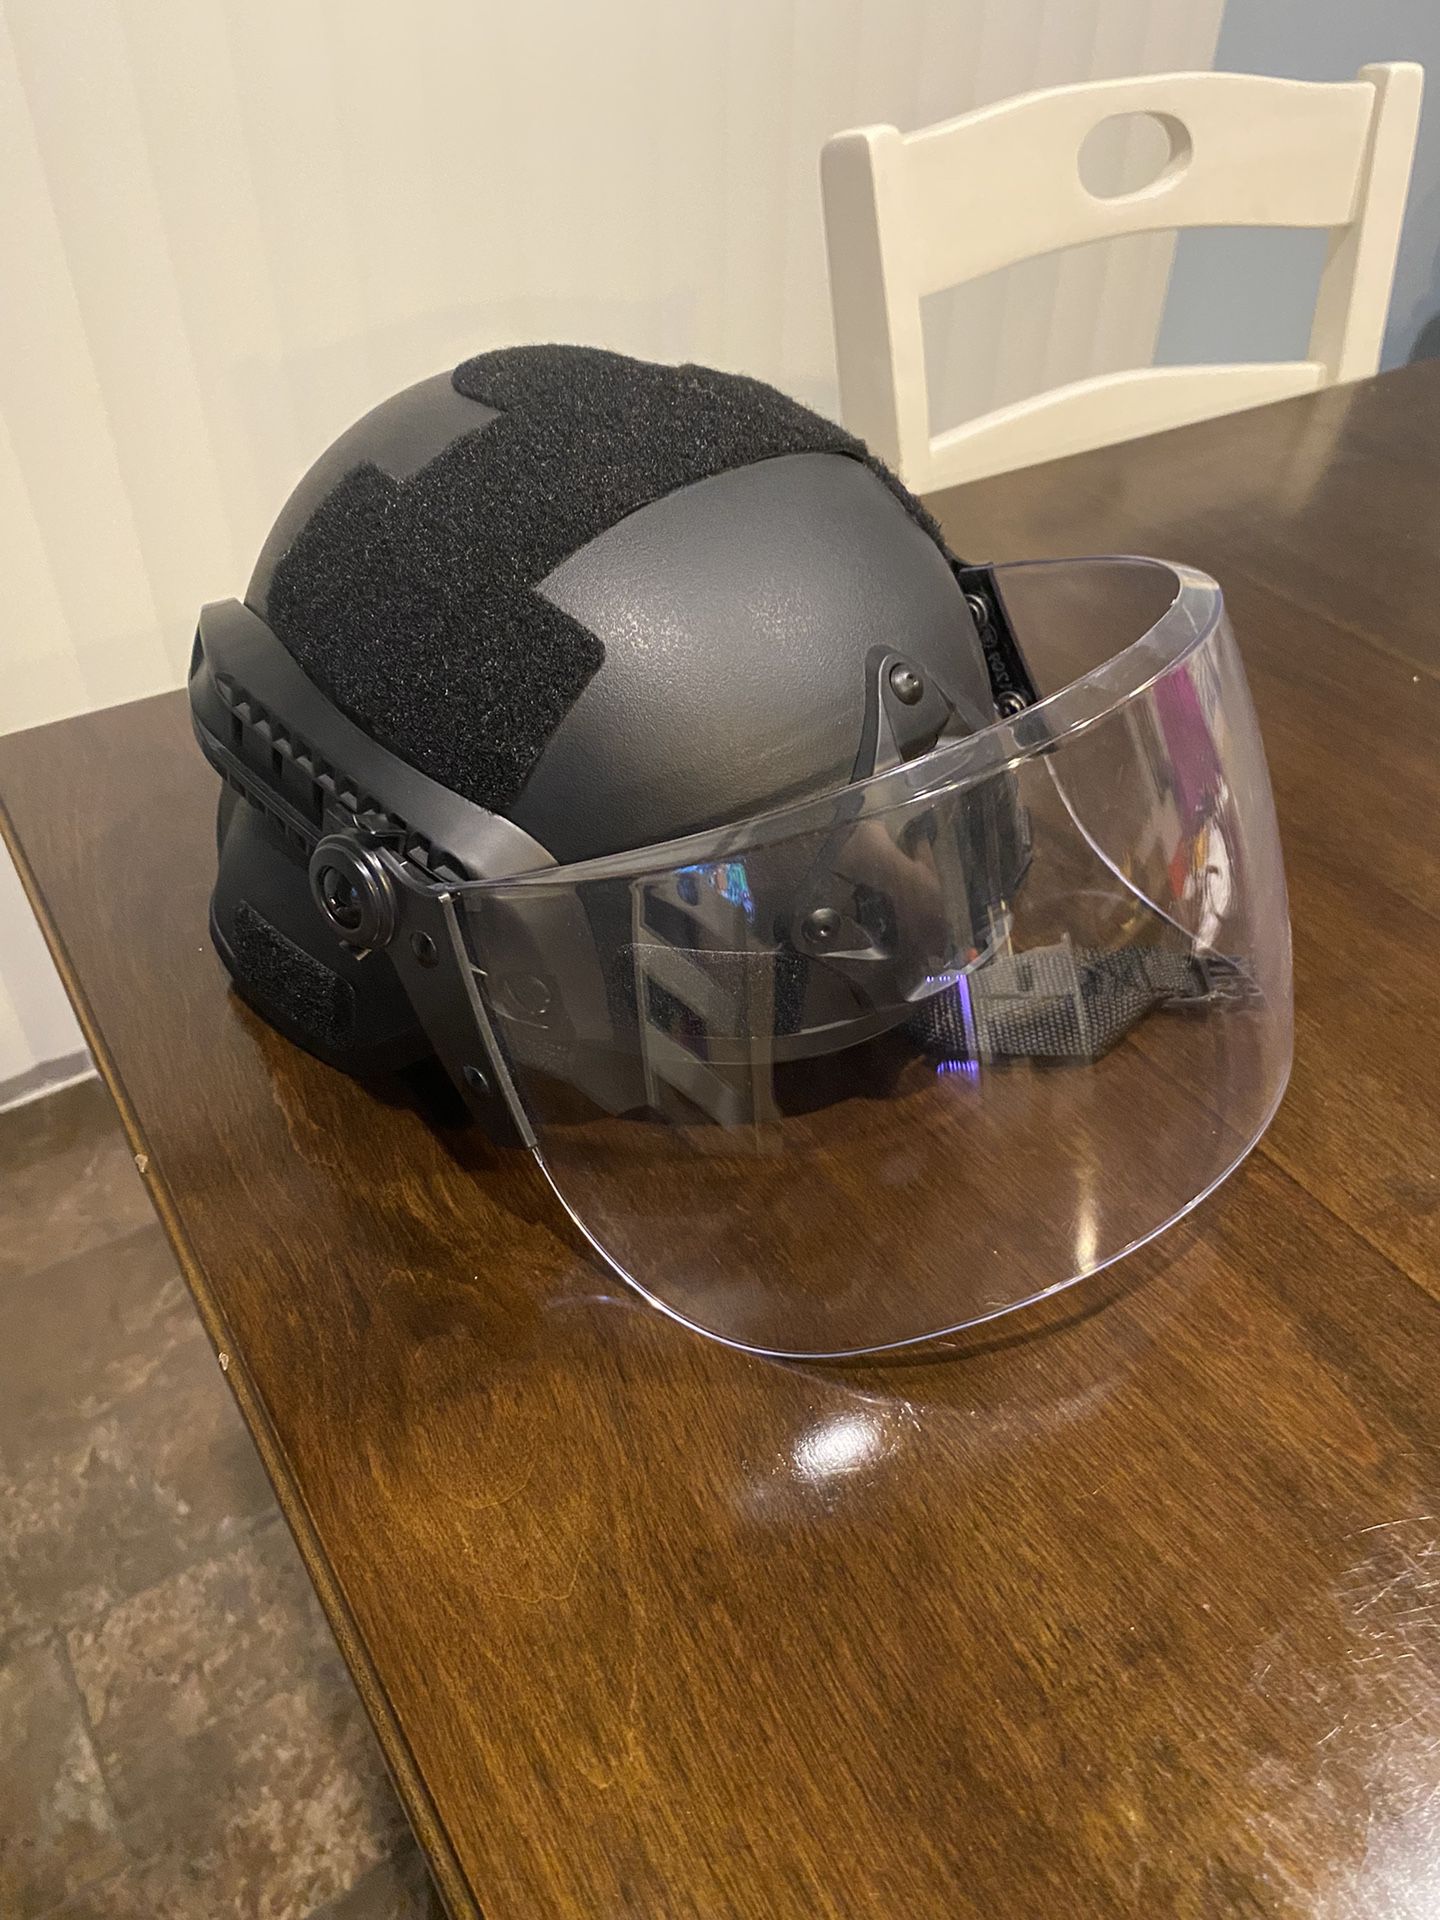 Airsoft MICH 2000 Helmet with adjustable visor